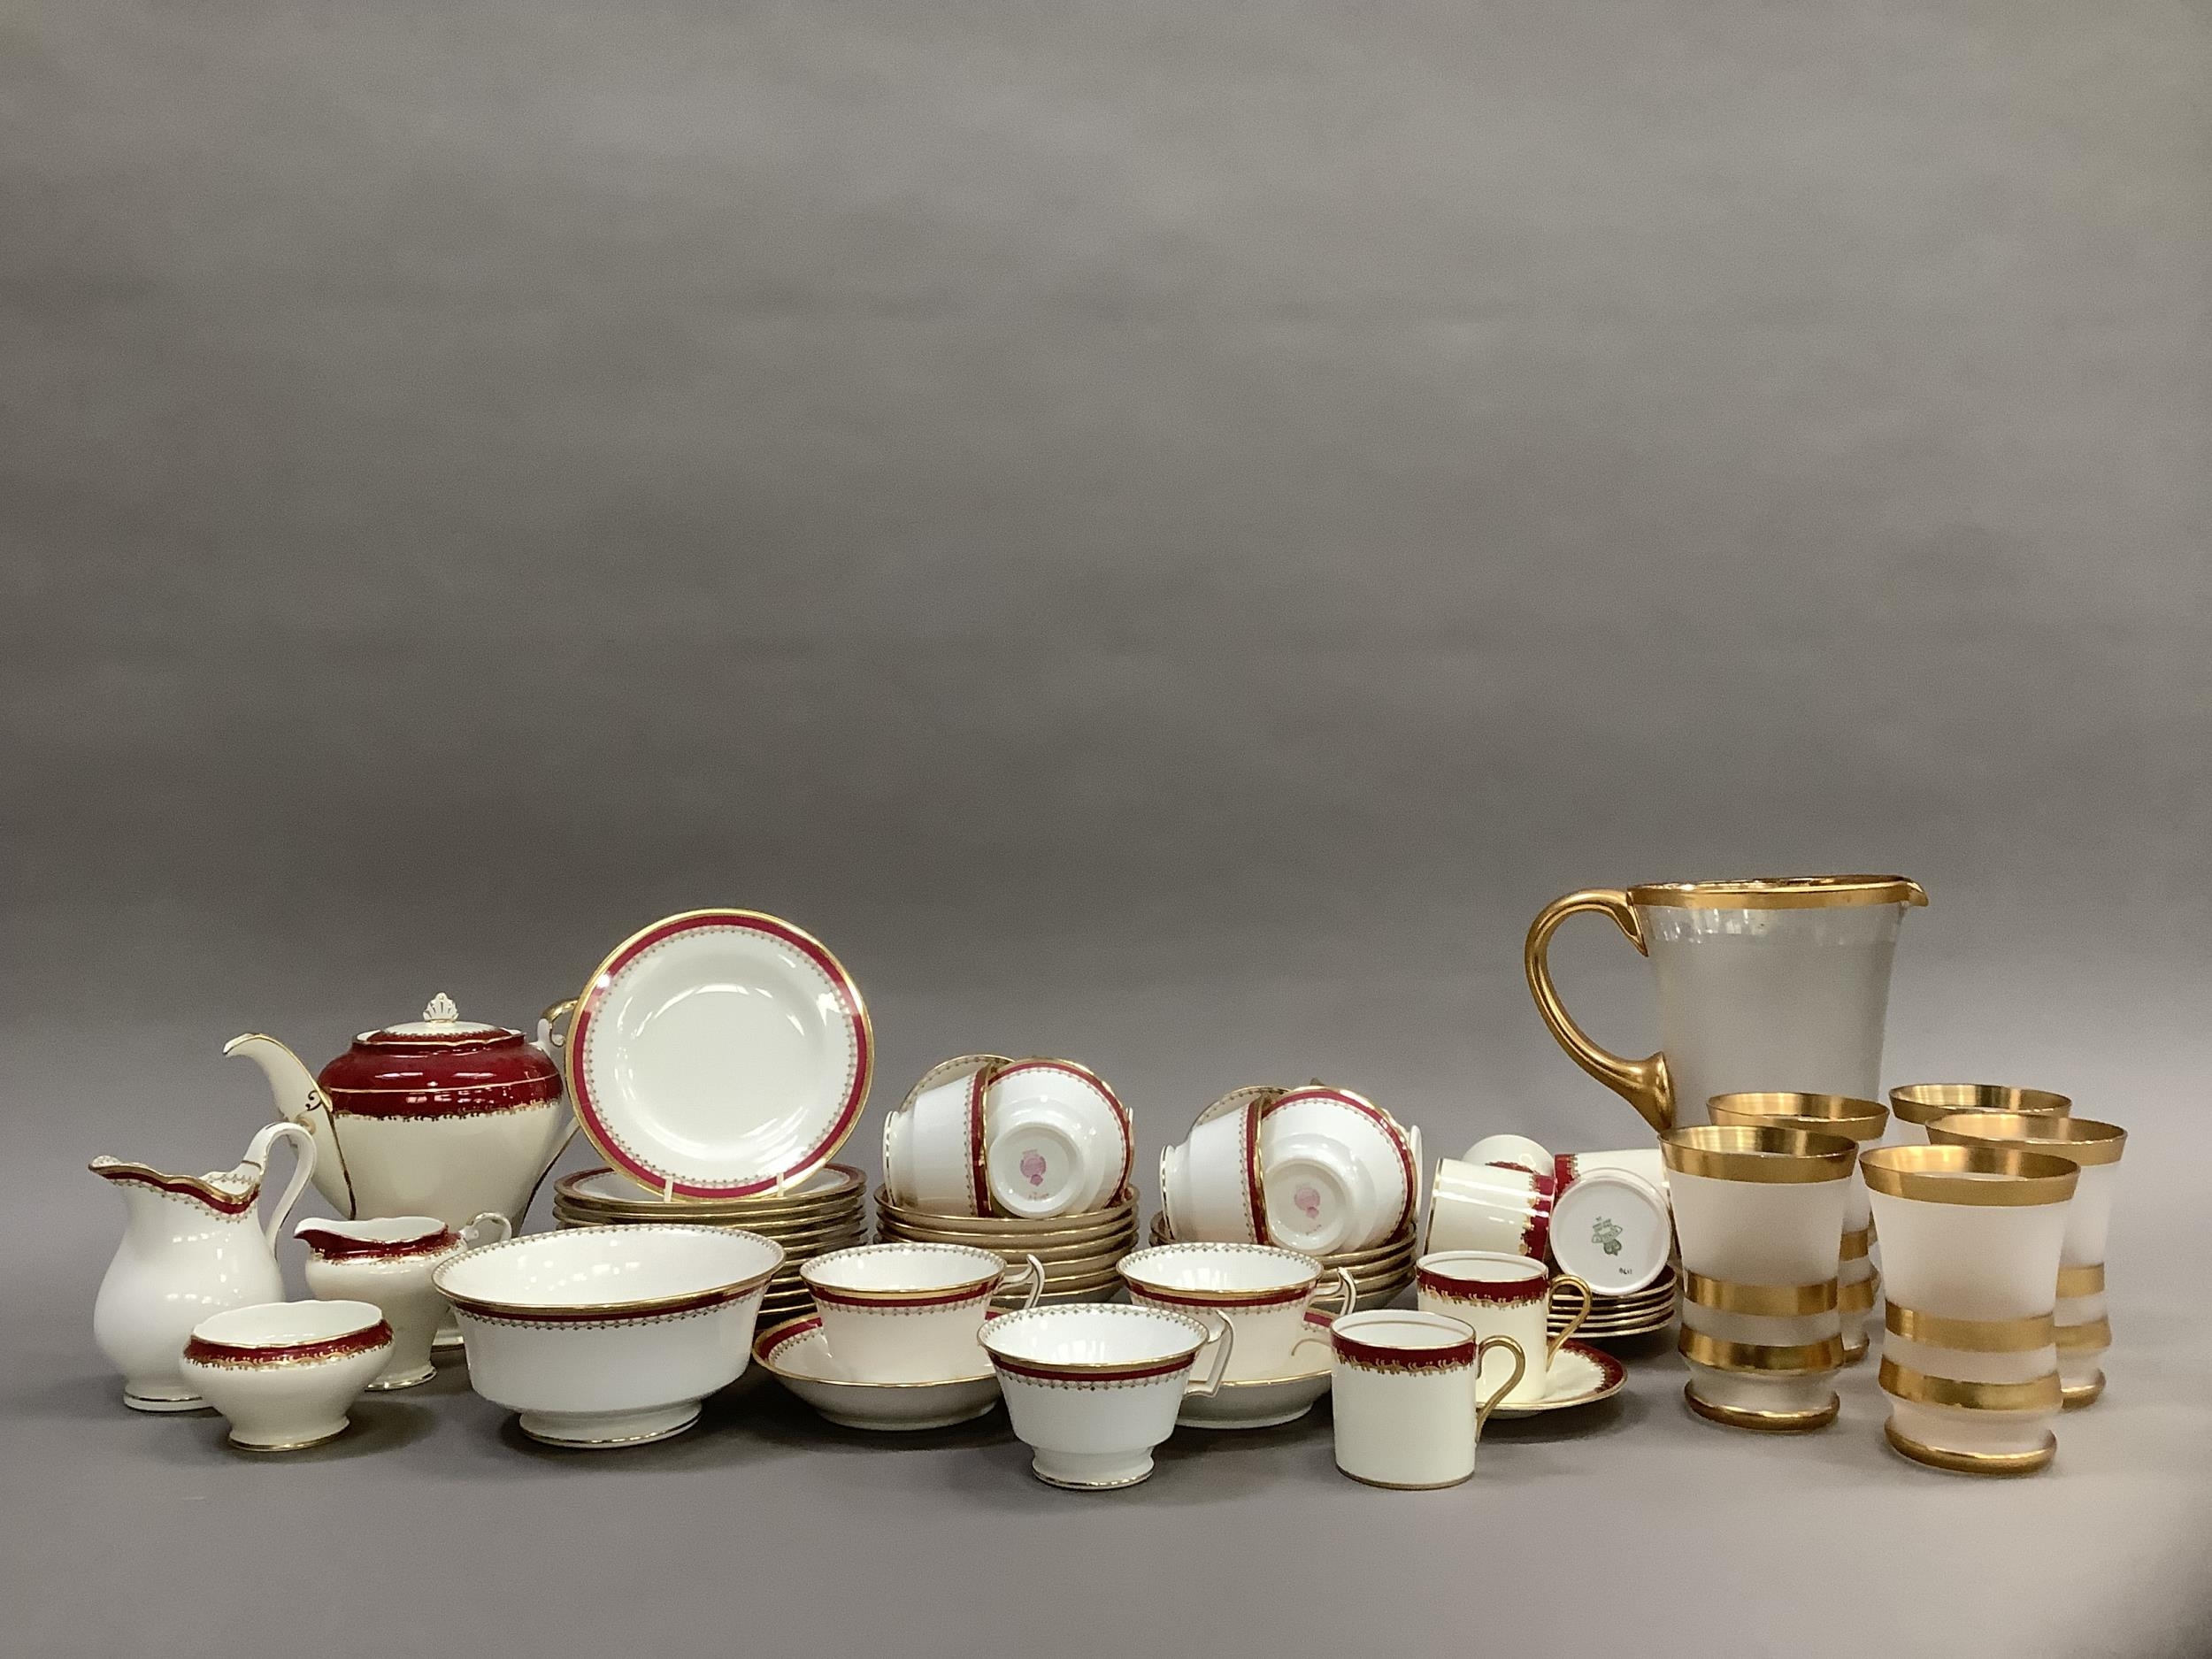 A Minton china tea service bordered in pink and gilt comprising teapot, sugar and milk, eleven cups, - Image 2 of 5